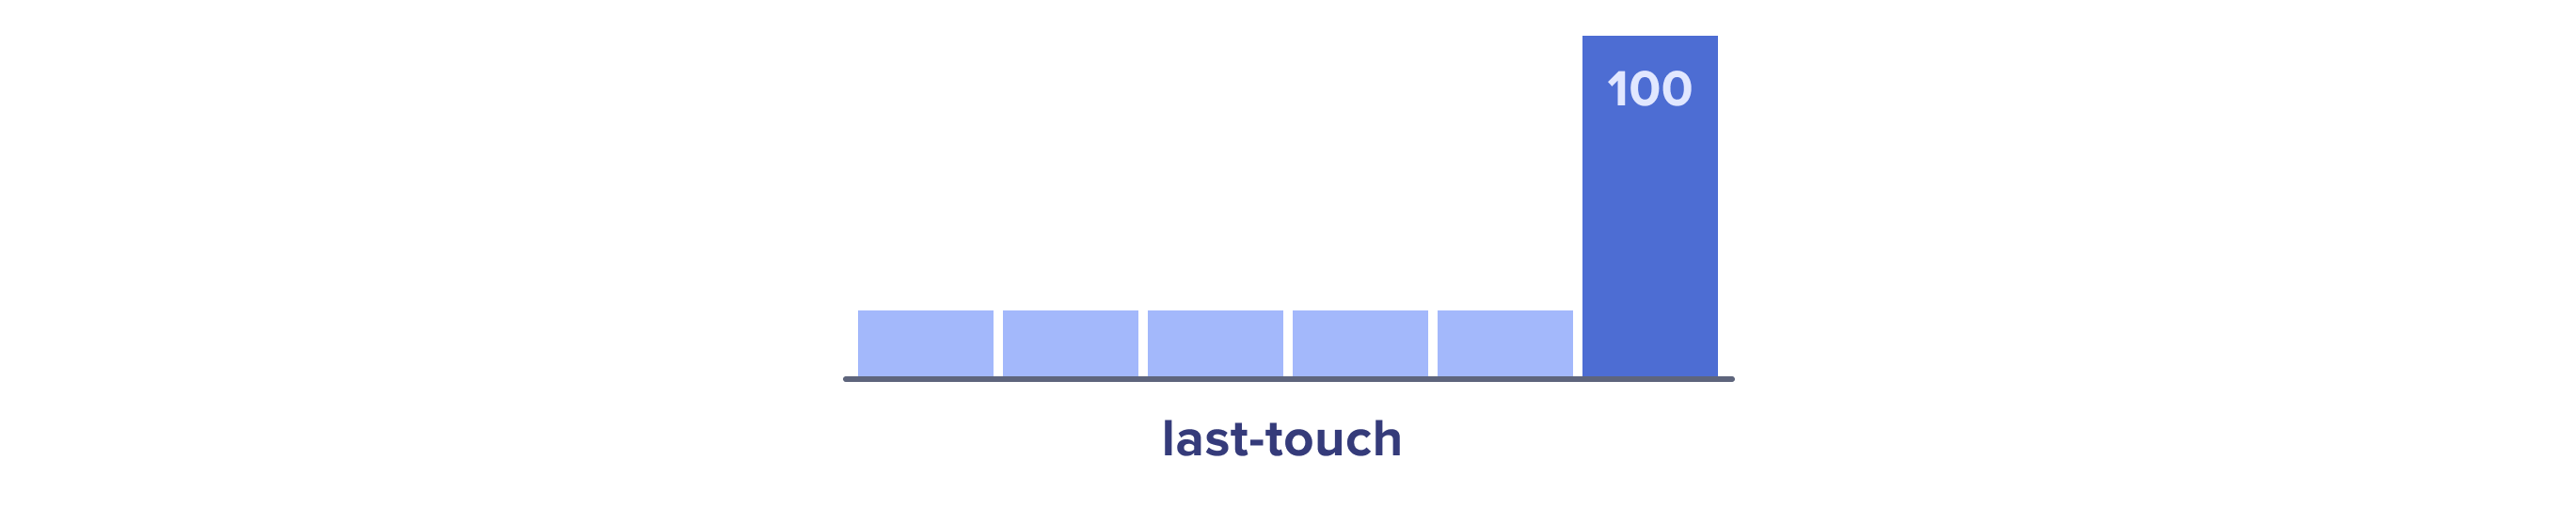 Last touch attribution model